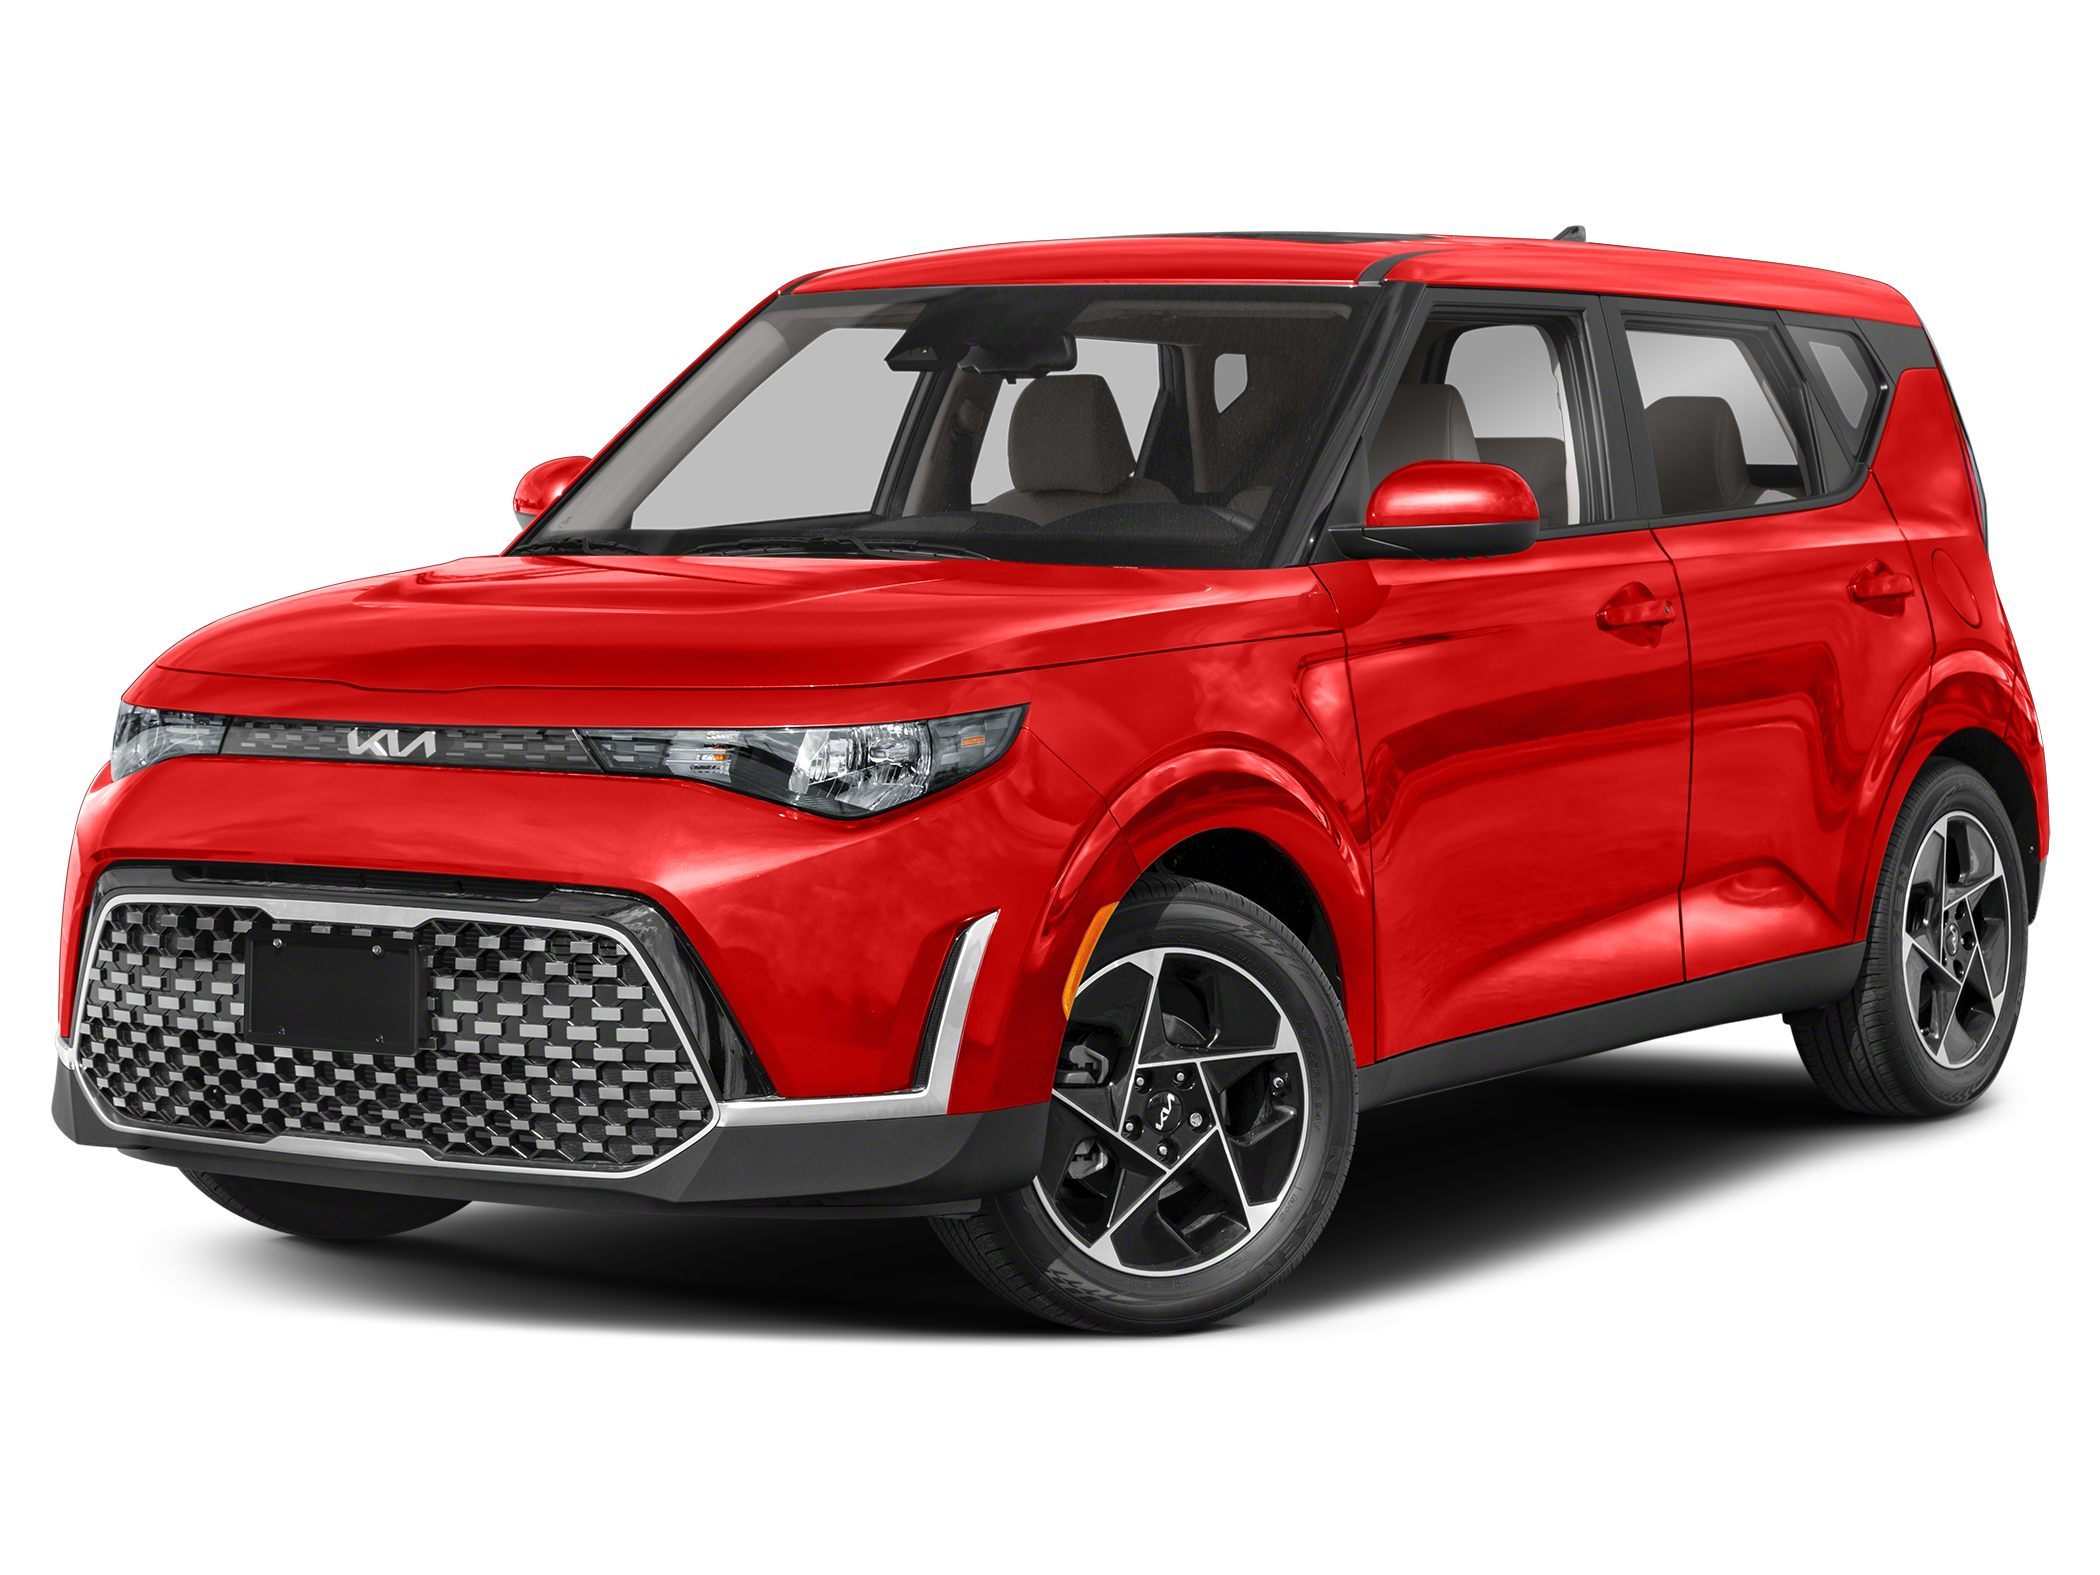 2023 Kia Soul Inferno Red Get Latest News 2023 Update